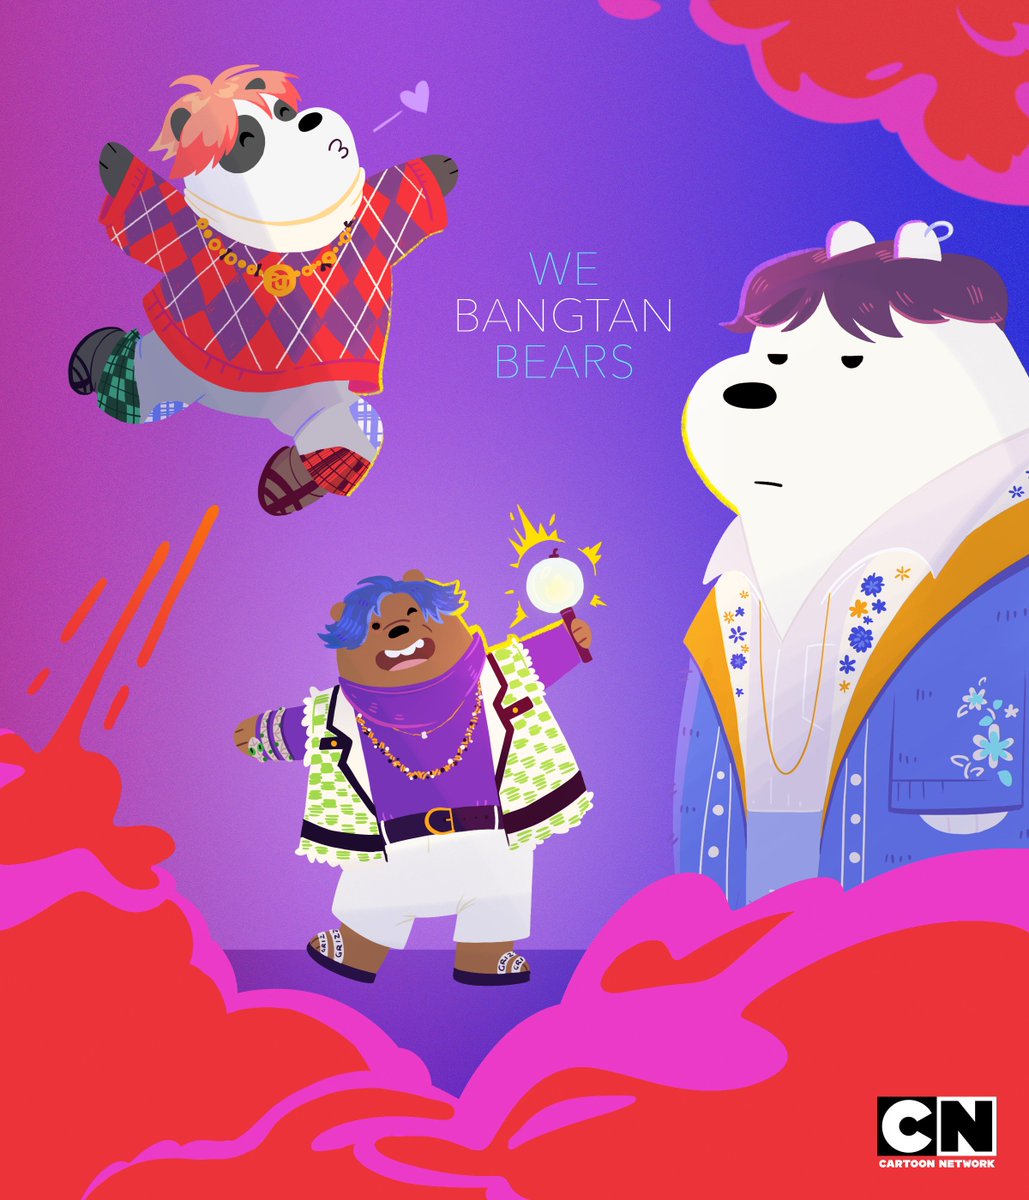 Bears with luv 🐻🐼❄🎤🎵 

#MAP_OF_THE_SOUL_PERSONA #WeBareBears #cartoonnetwork #BoyWithLuv